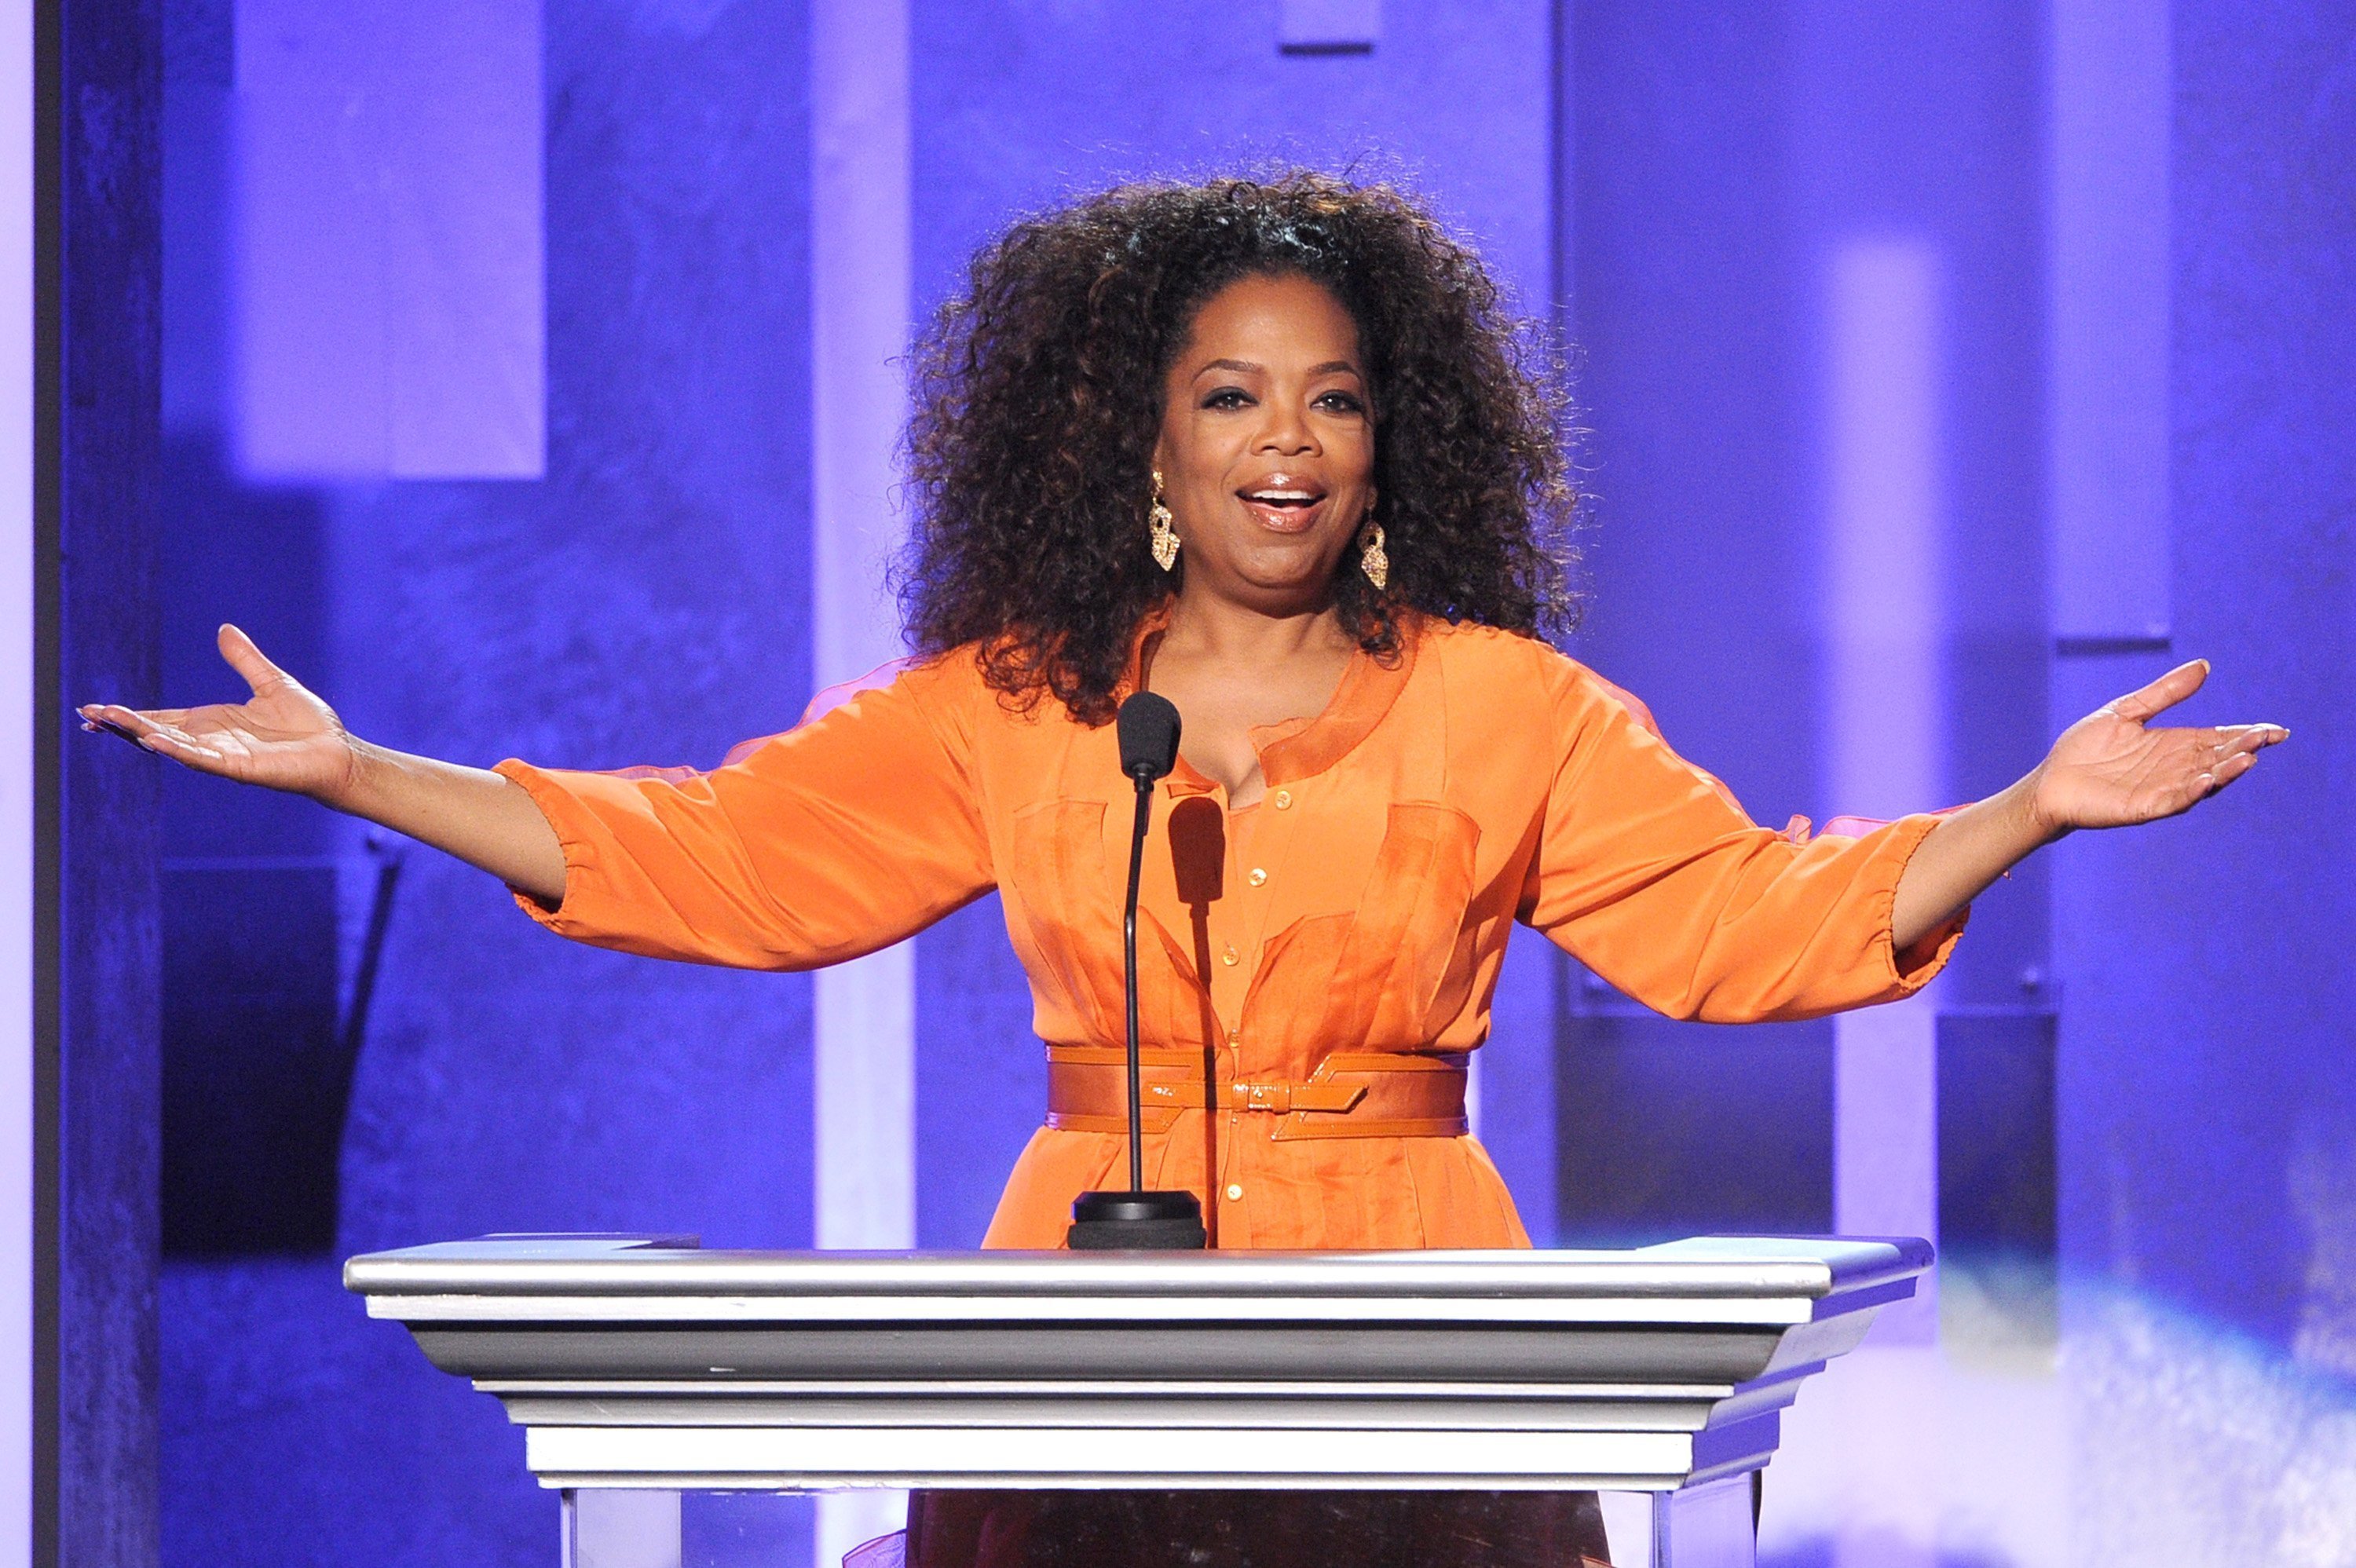 Oprah Winfrey speaks onstage during the 45th NAACP Image Awards presented by TV One at Pasadena Civic Auditorium on February 22, 2014. | Source: Getty Images